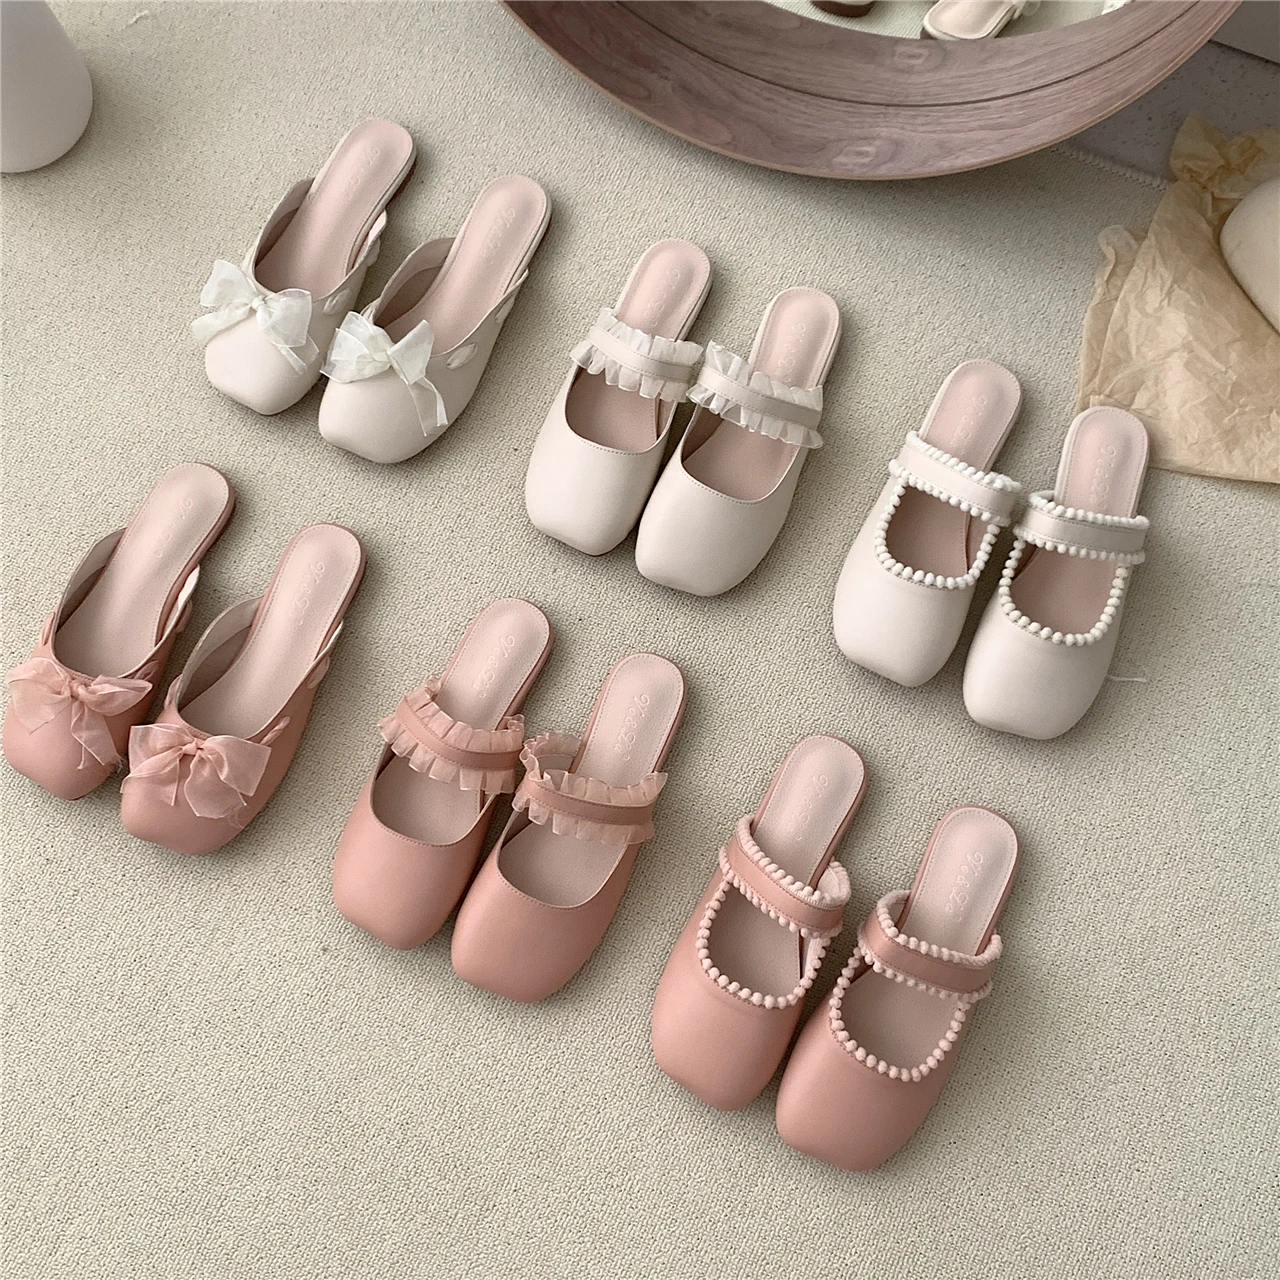 

Bailamos Women Slipper 2022 Bowknot Flat Shoes Soft Pregnant Scoop Mules Shoes Female Ballet Shoes Leisure Half Slippers Mujer